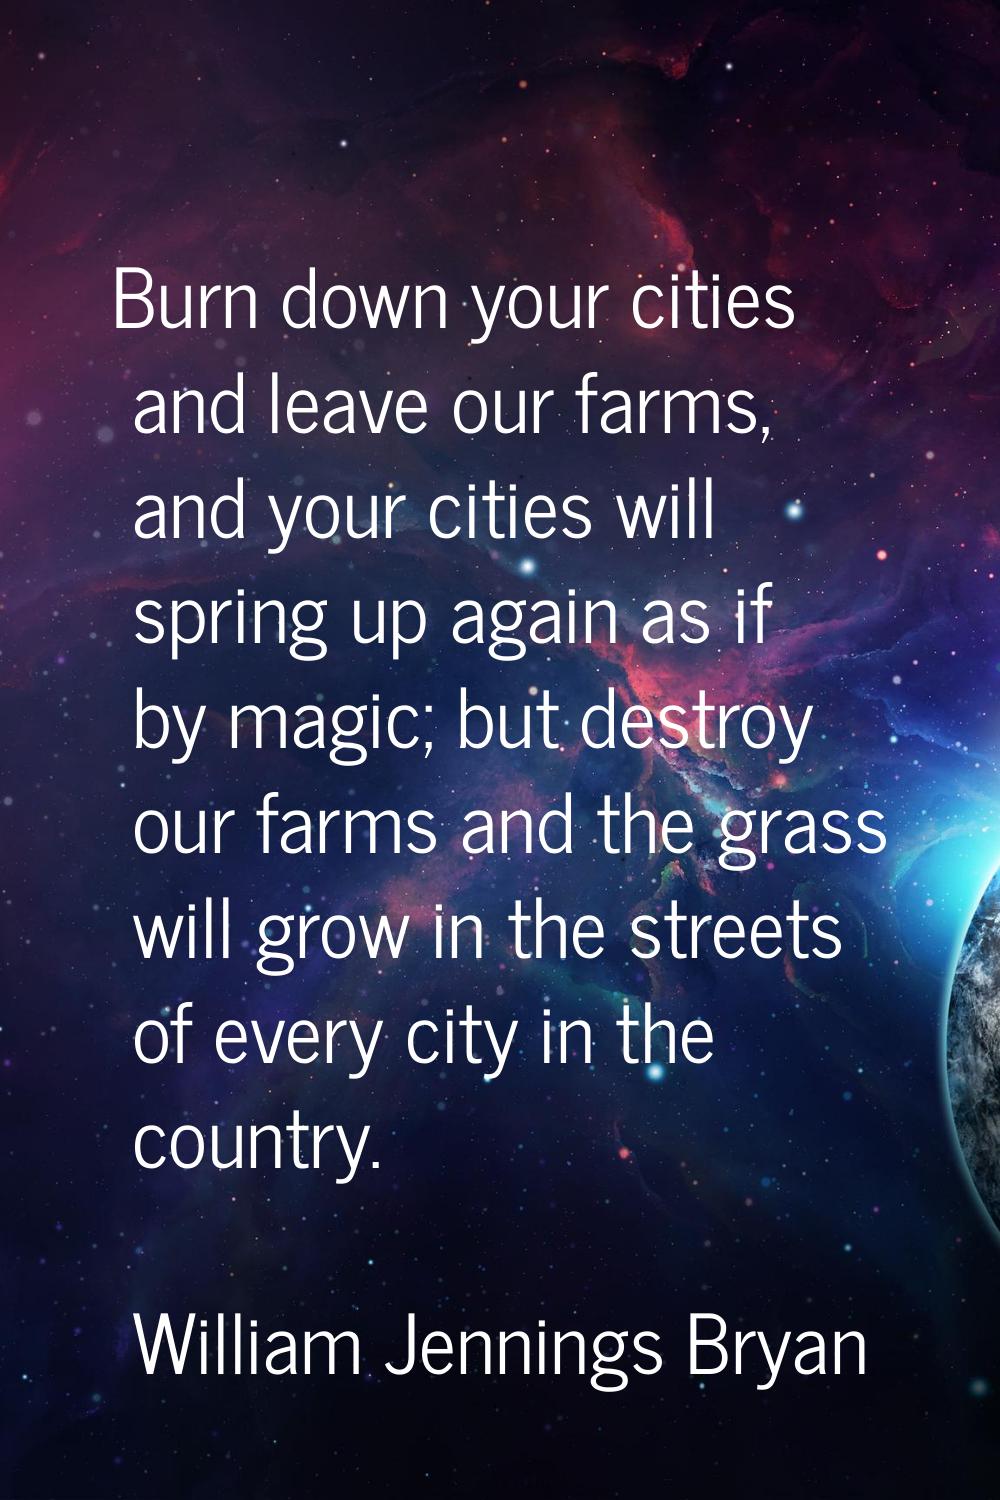 Burn down your cities and leave our farms, and your cities will spring up again as if by magic; but